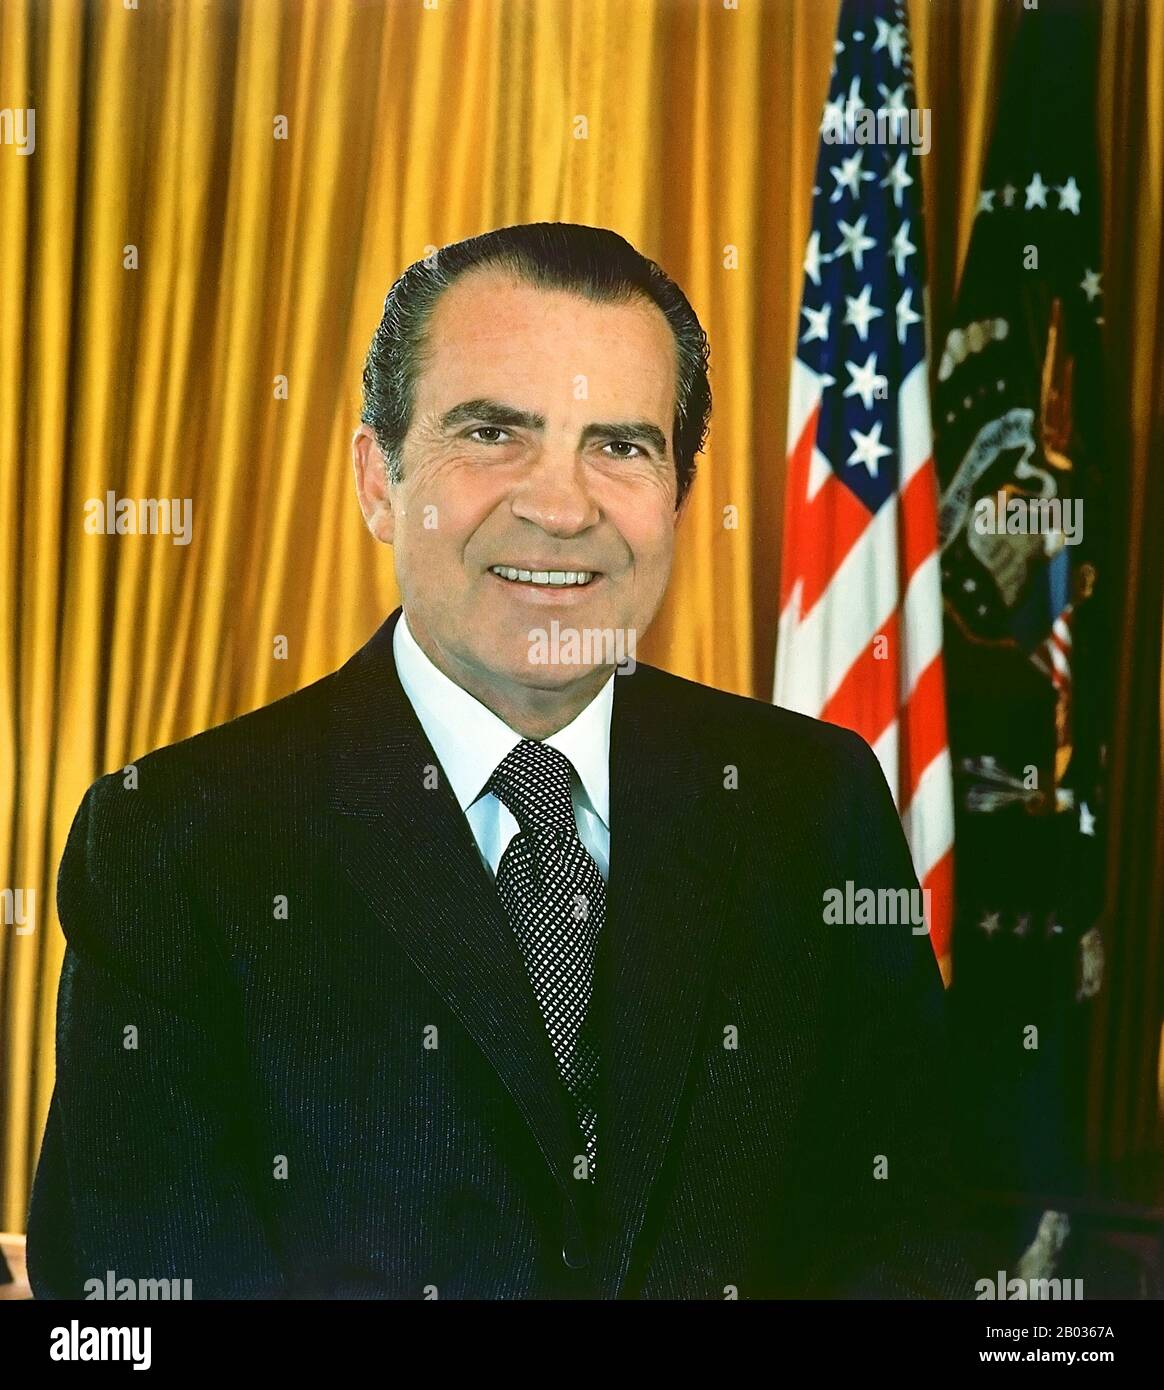 Richard Milhous Nixon (January 9, 1913 – April 22, 1994) was the 37th President of the United States, serving from 1969 to 1974. Nixon is the only president to have resigned the office.  Nixon inherited the Vietnam War from his predecessors Kennedy and Johnson. American involvement in Vietnam was widely unpopular; although Nixon initially escalated the war there, he subsequently moved to end US involvement, completely withdrawing American forces by 1973.  Nixon's ground-breaking visit to the People's Republic of China in 1972 opened diplomatic relations between the two nations, and he initiate Stock Photo